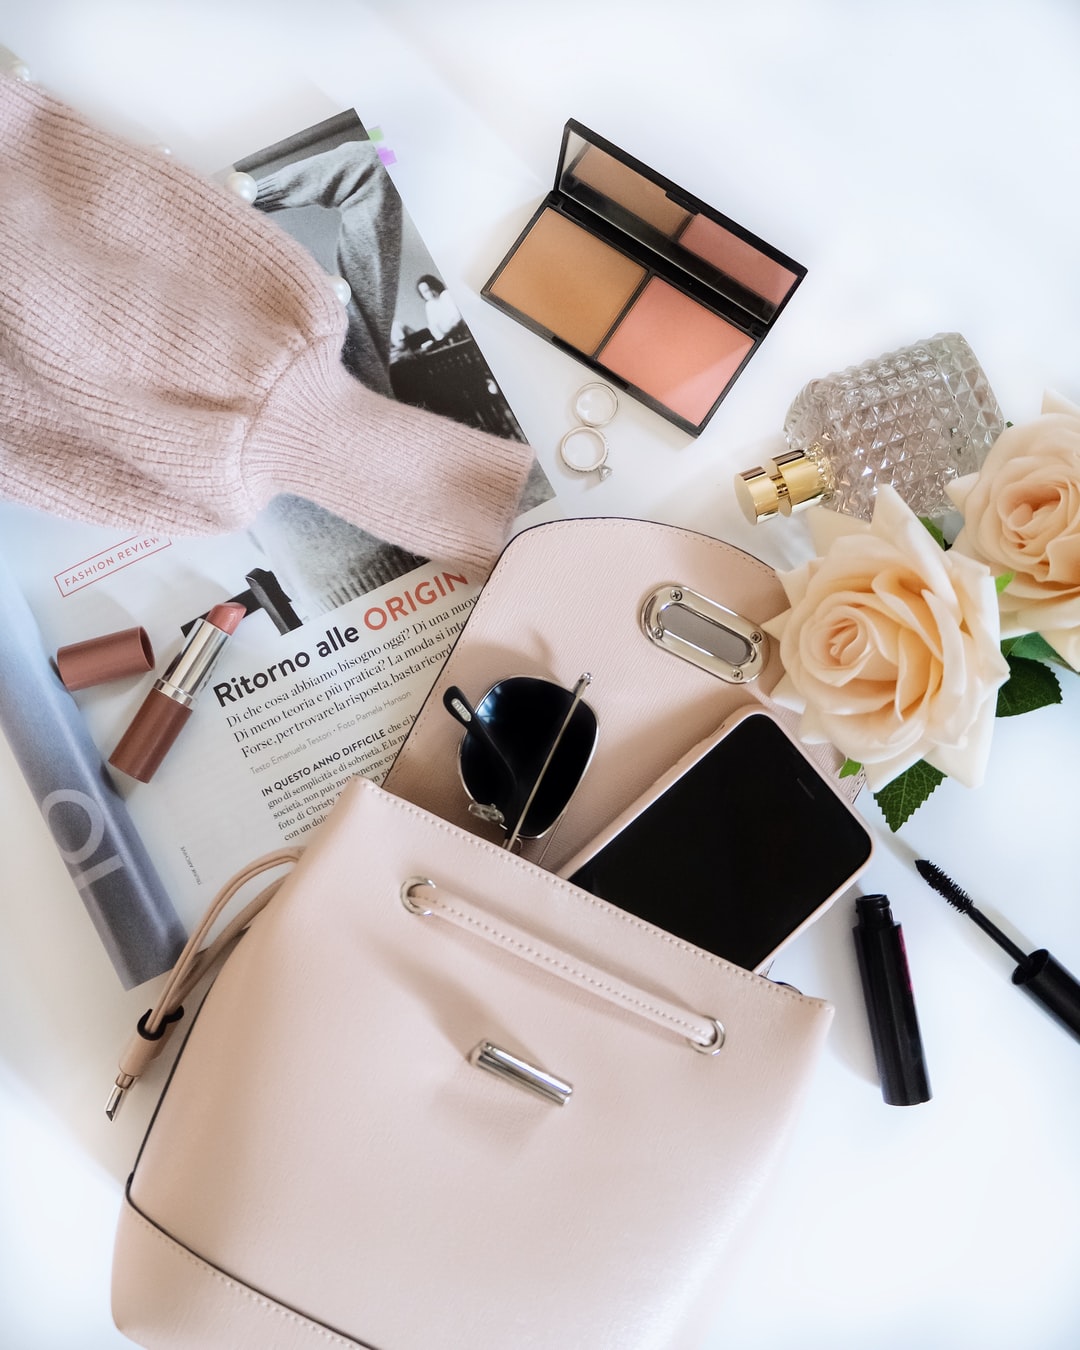 Handbag essentials that every woman should always carry